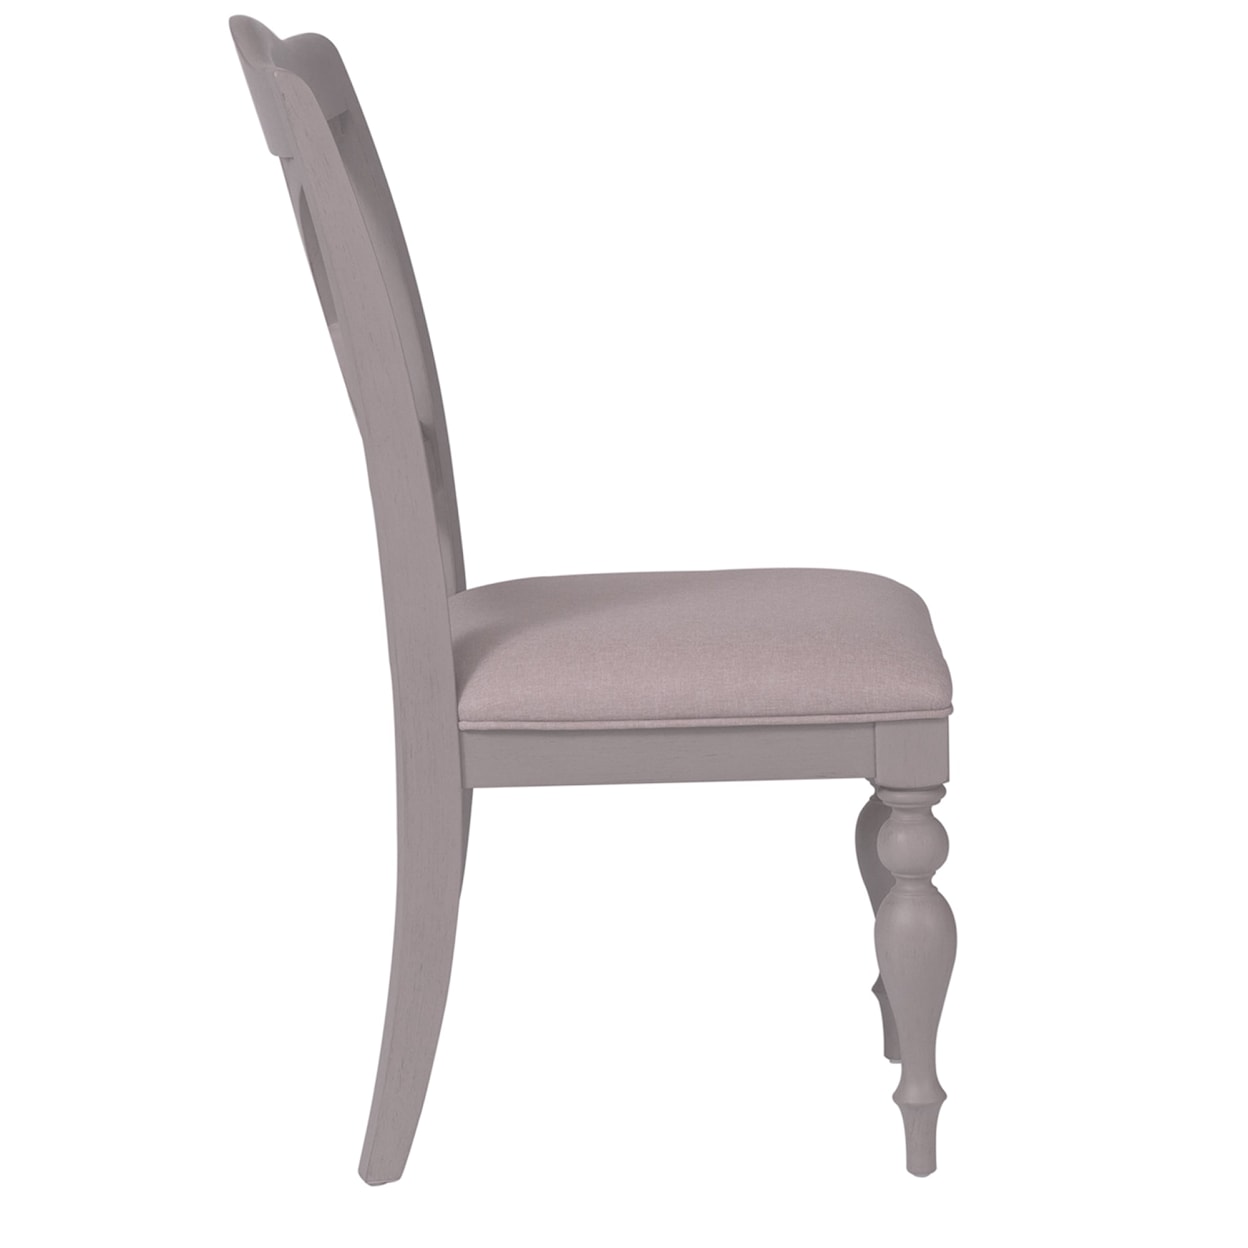 Liberty Furniture Summer House II Upholstered Side Chair